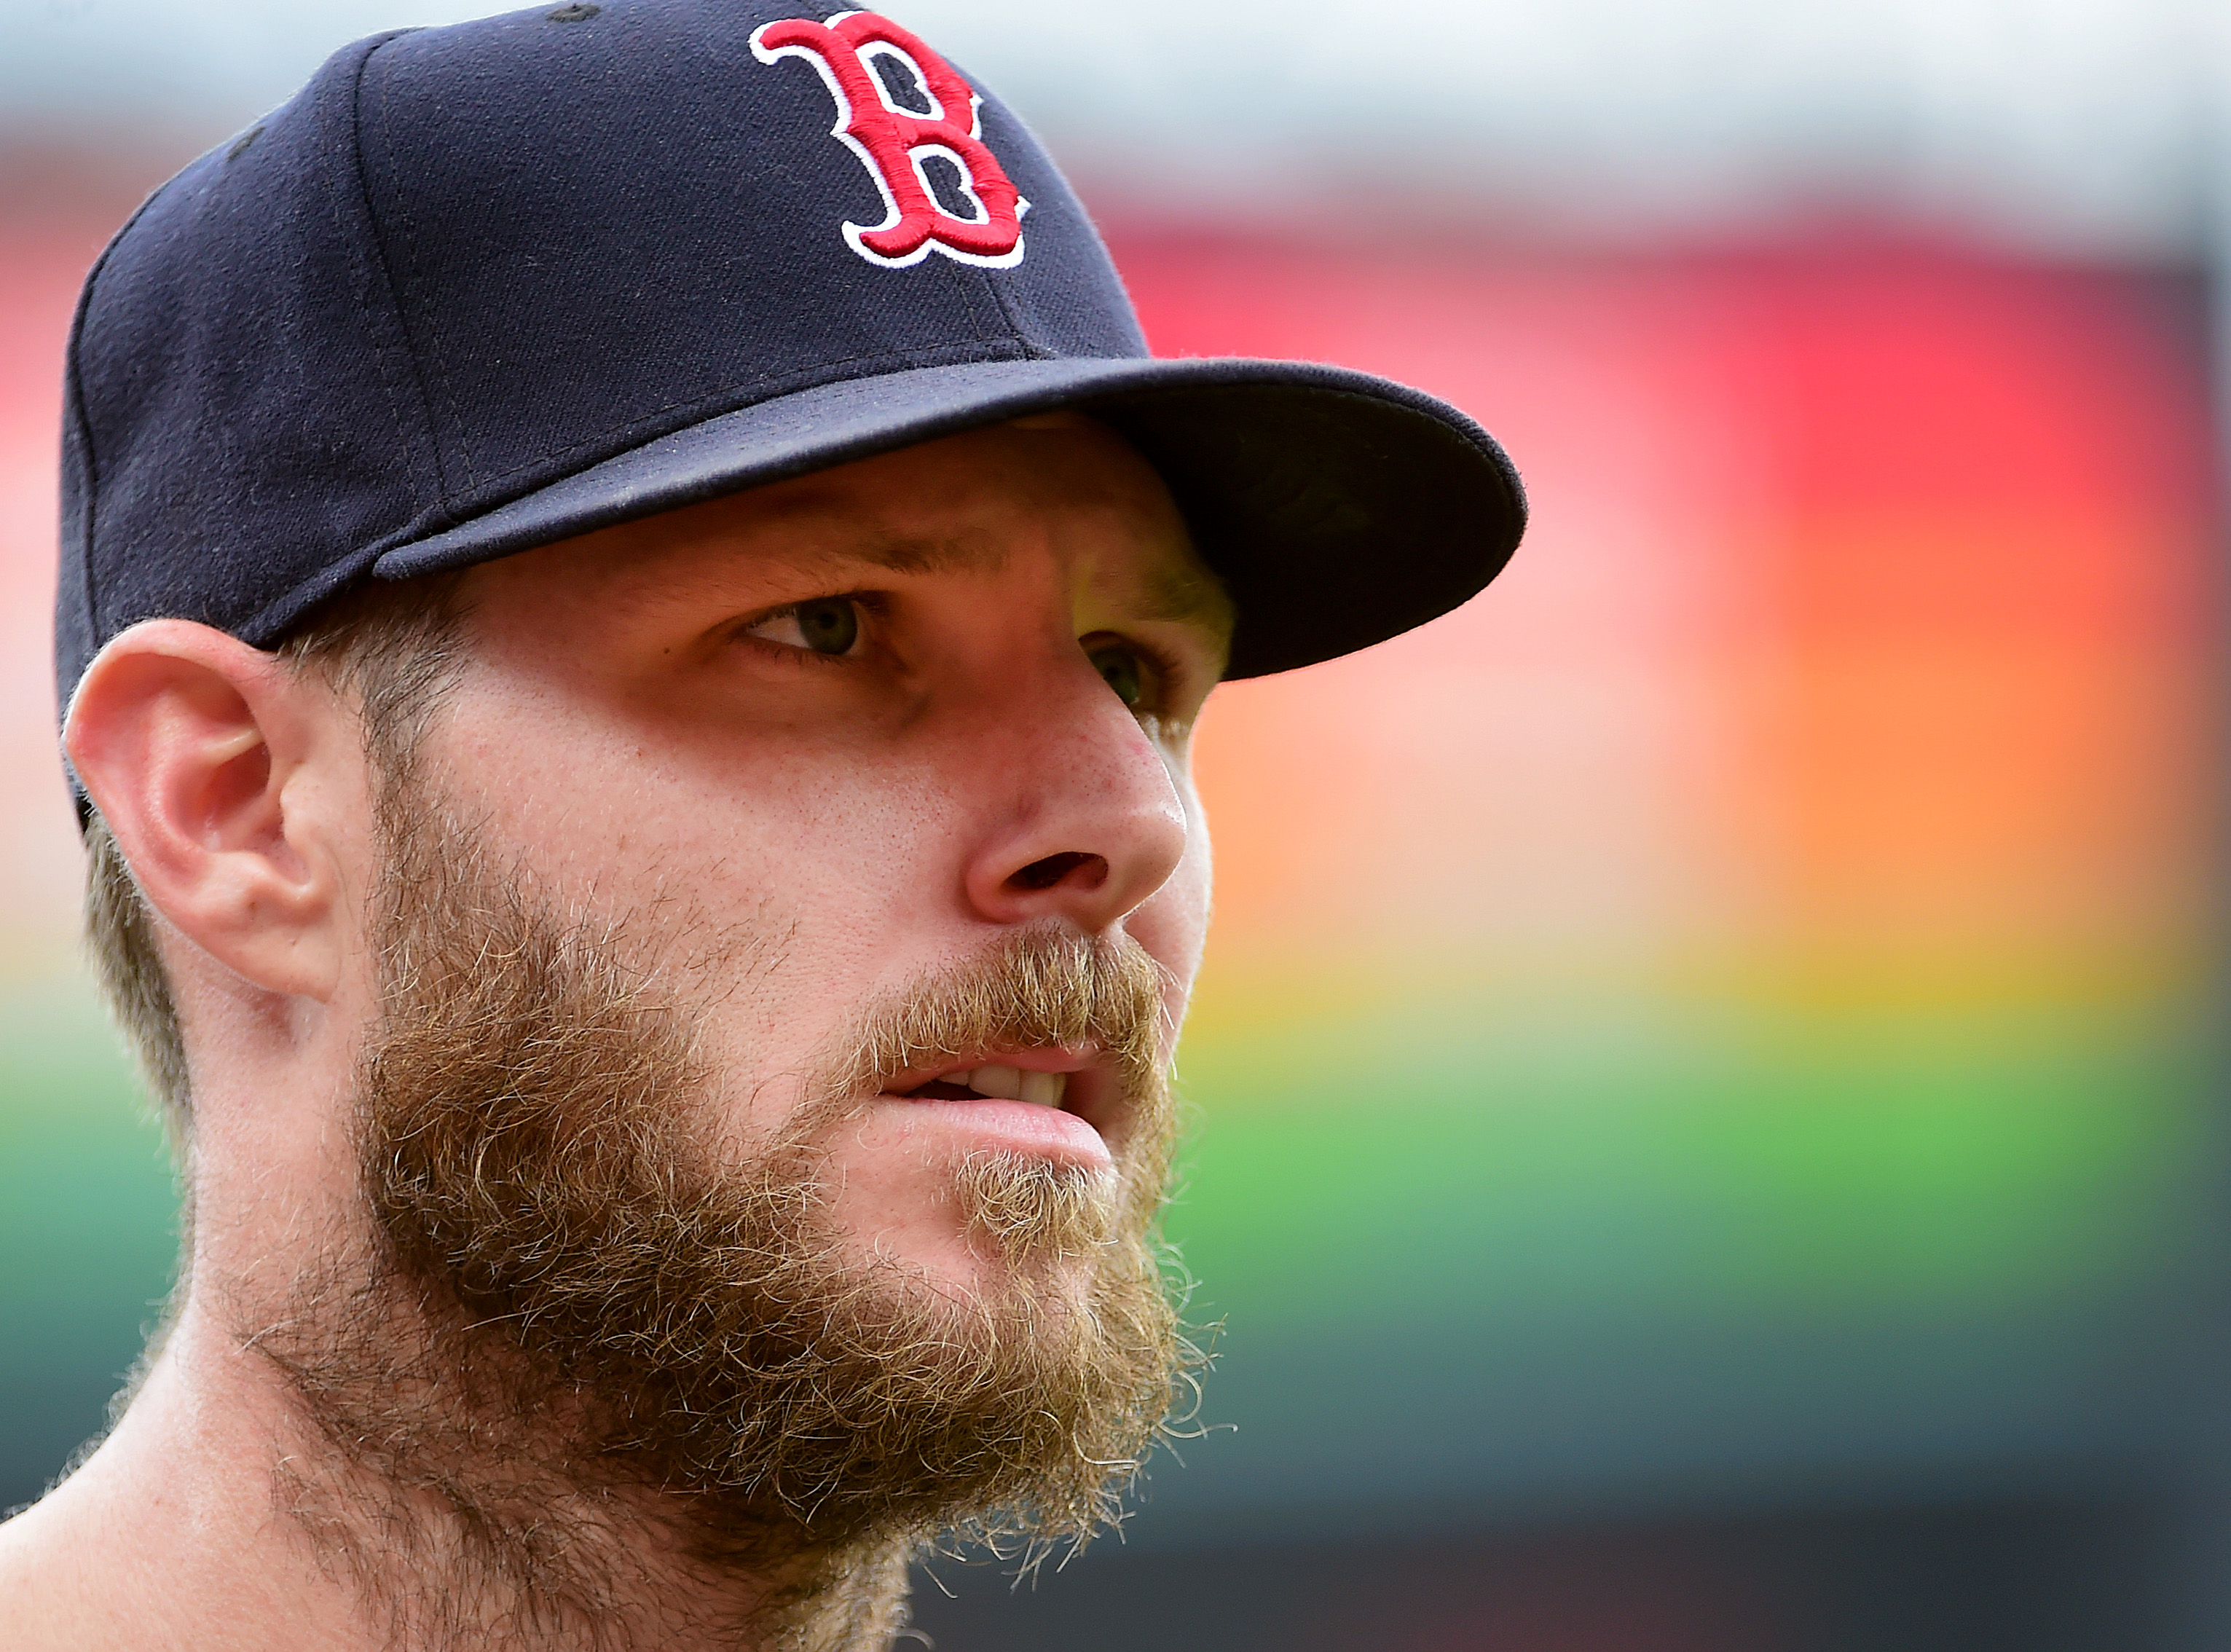 A Look into Chris Sale’s Strikeouts